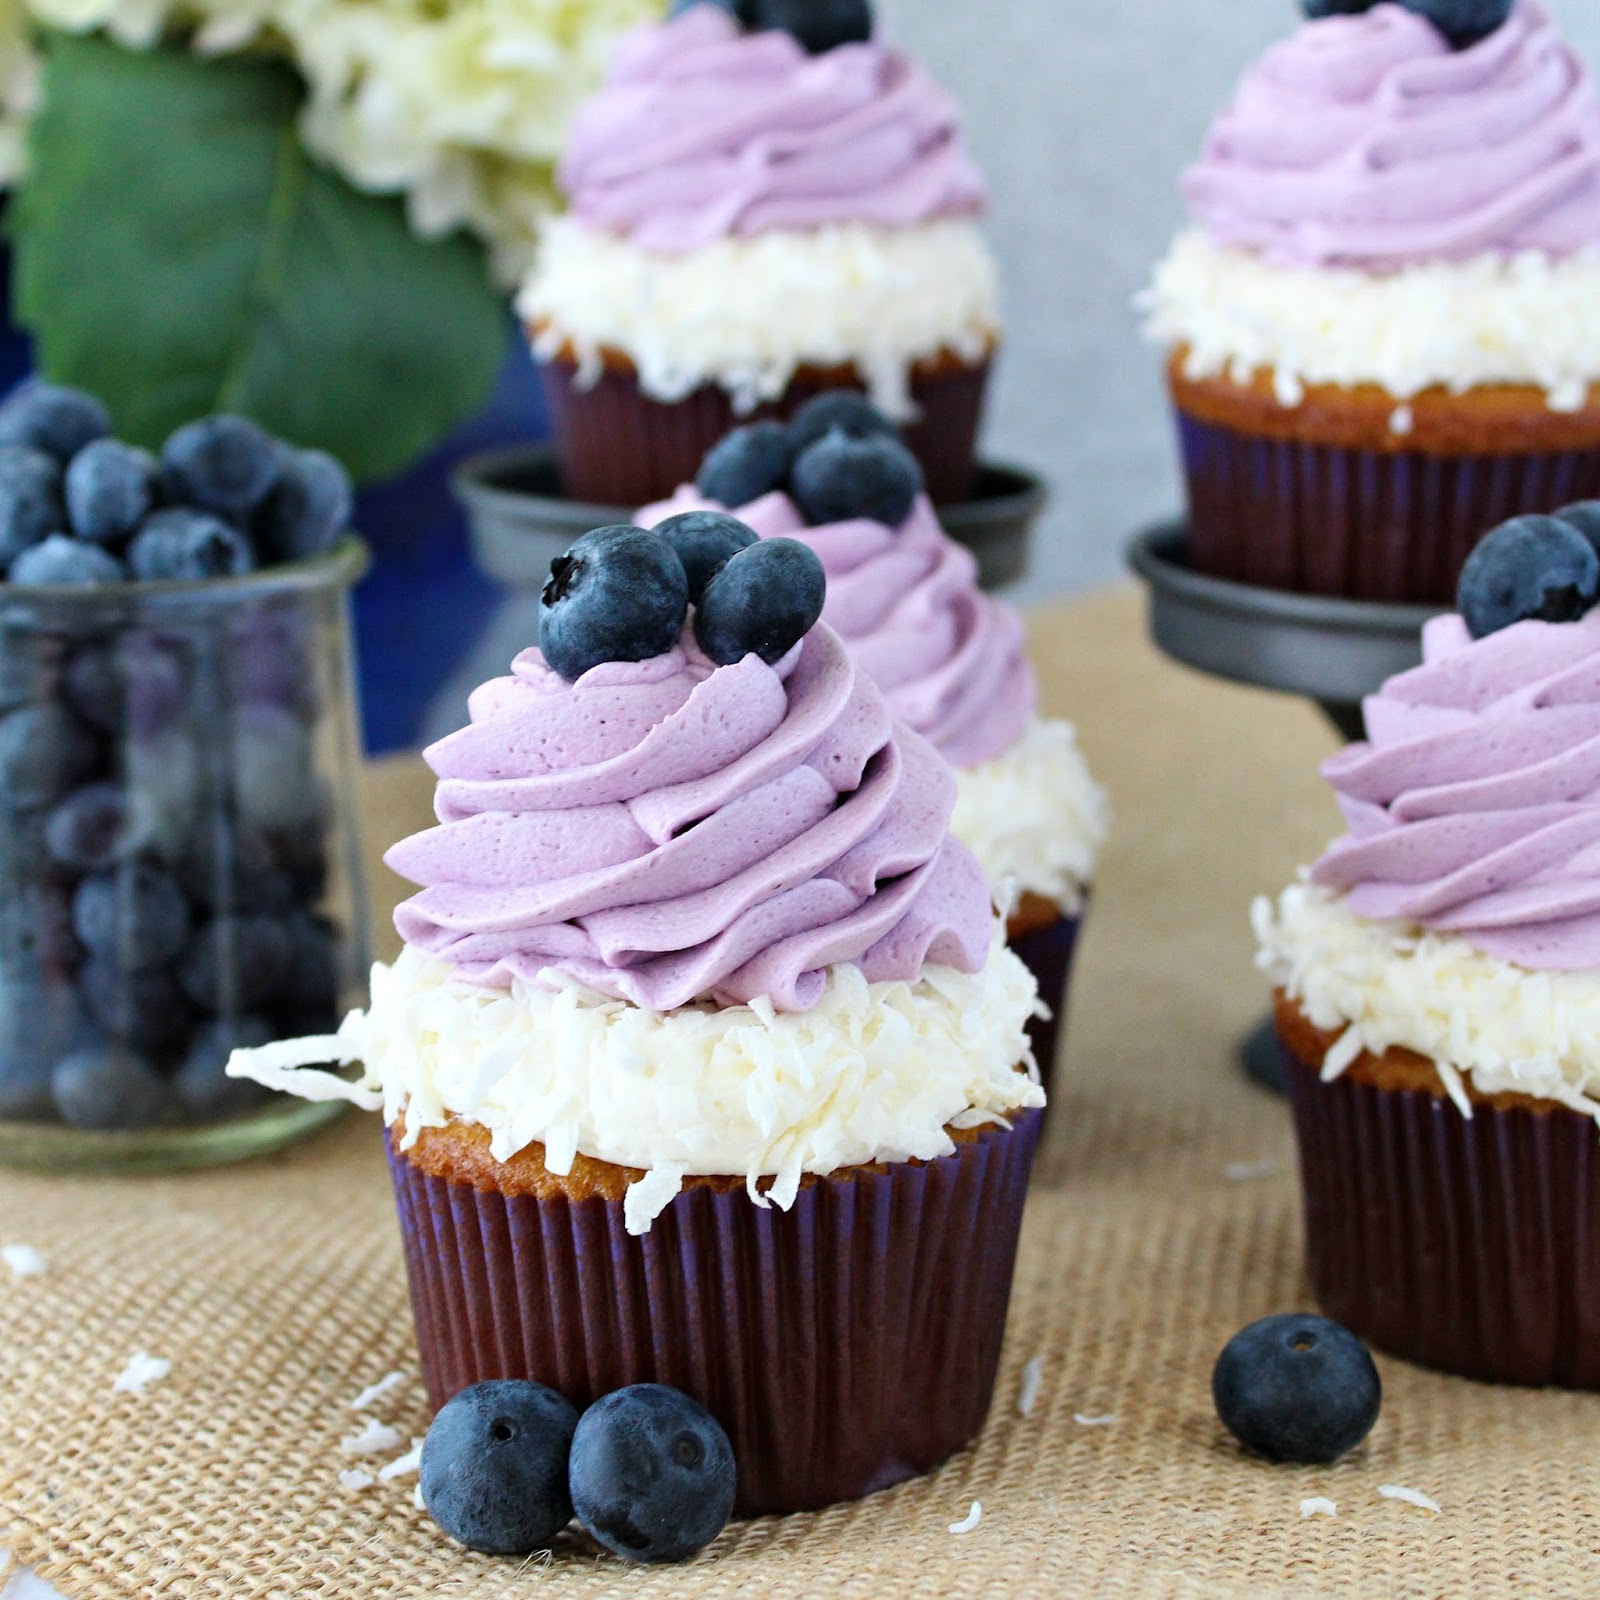 Coconut Cupcakes with Coconut and Blueberry Frosting.